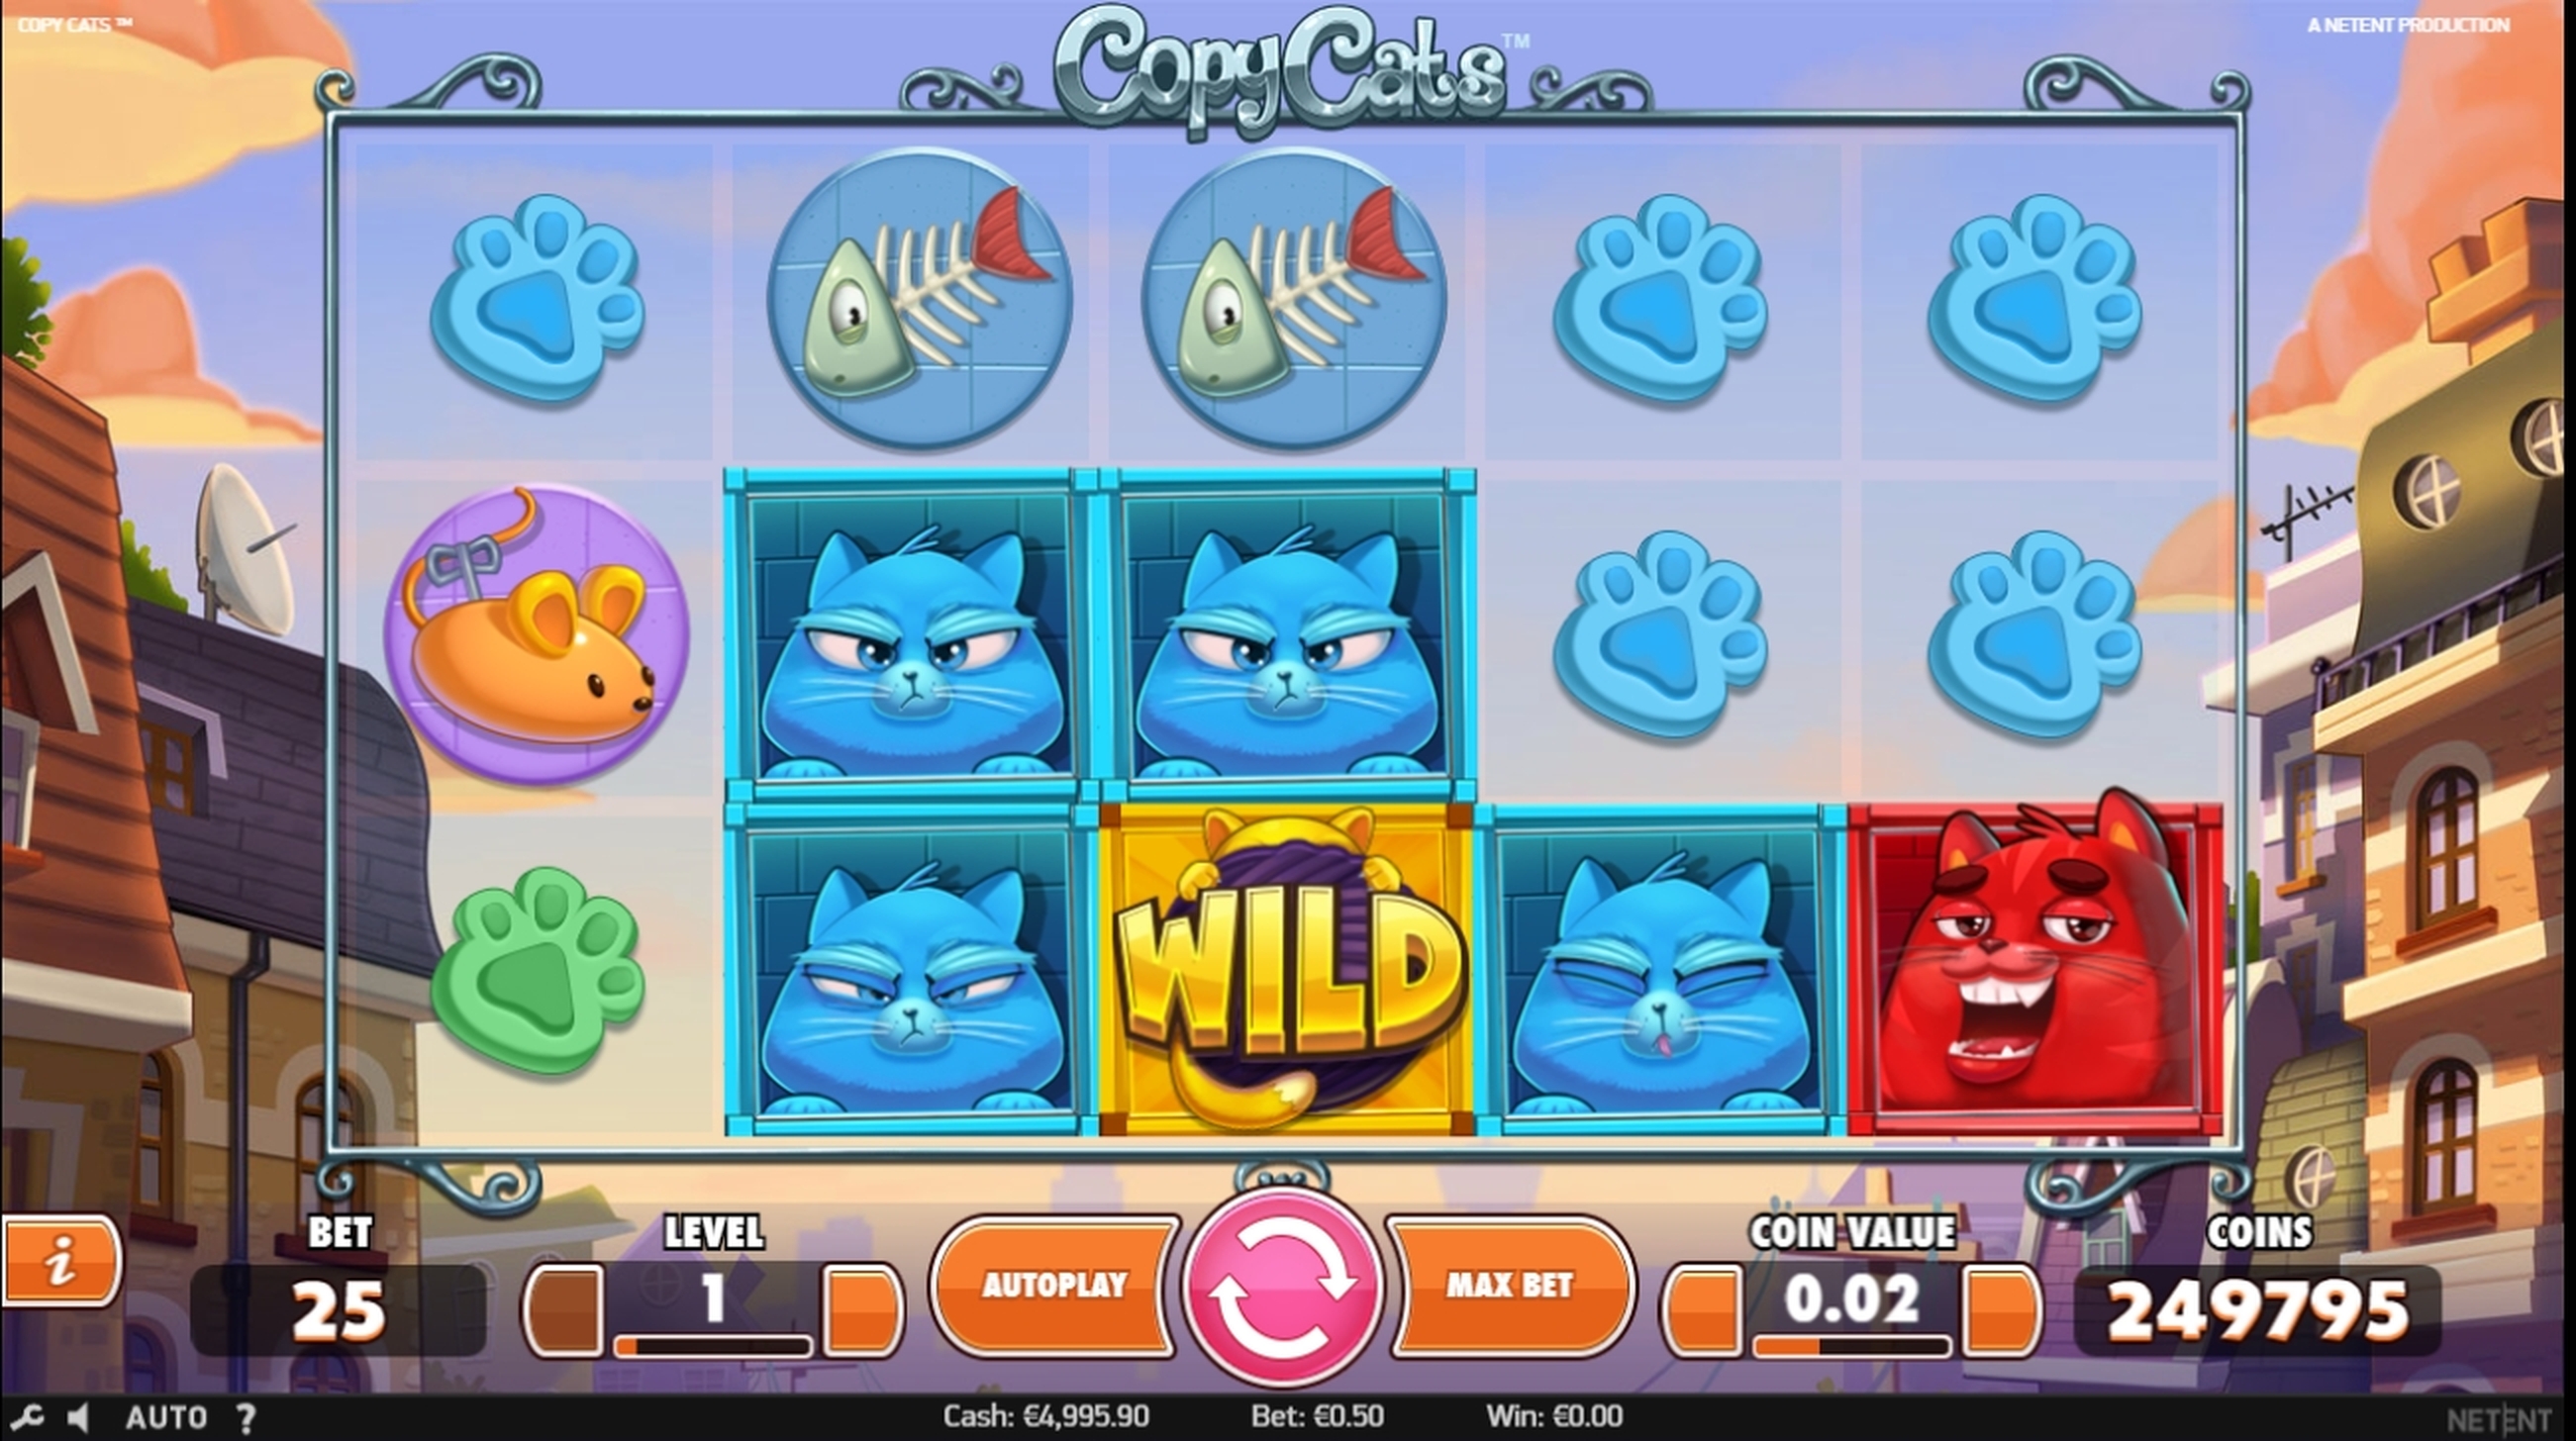 Reels in Copy Cats Slot Game by NetEnt